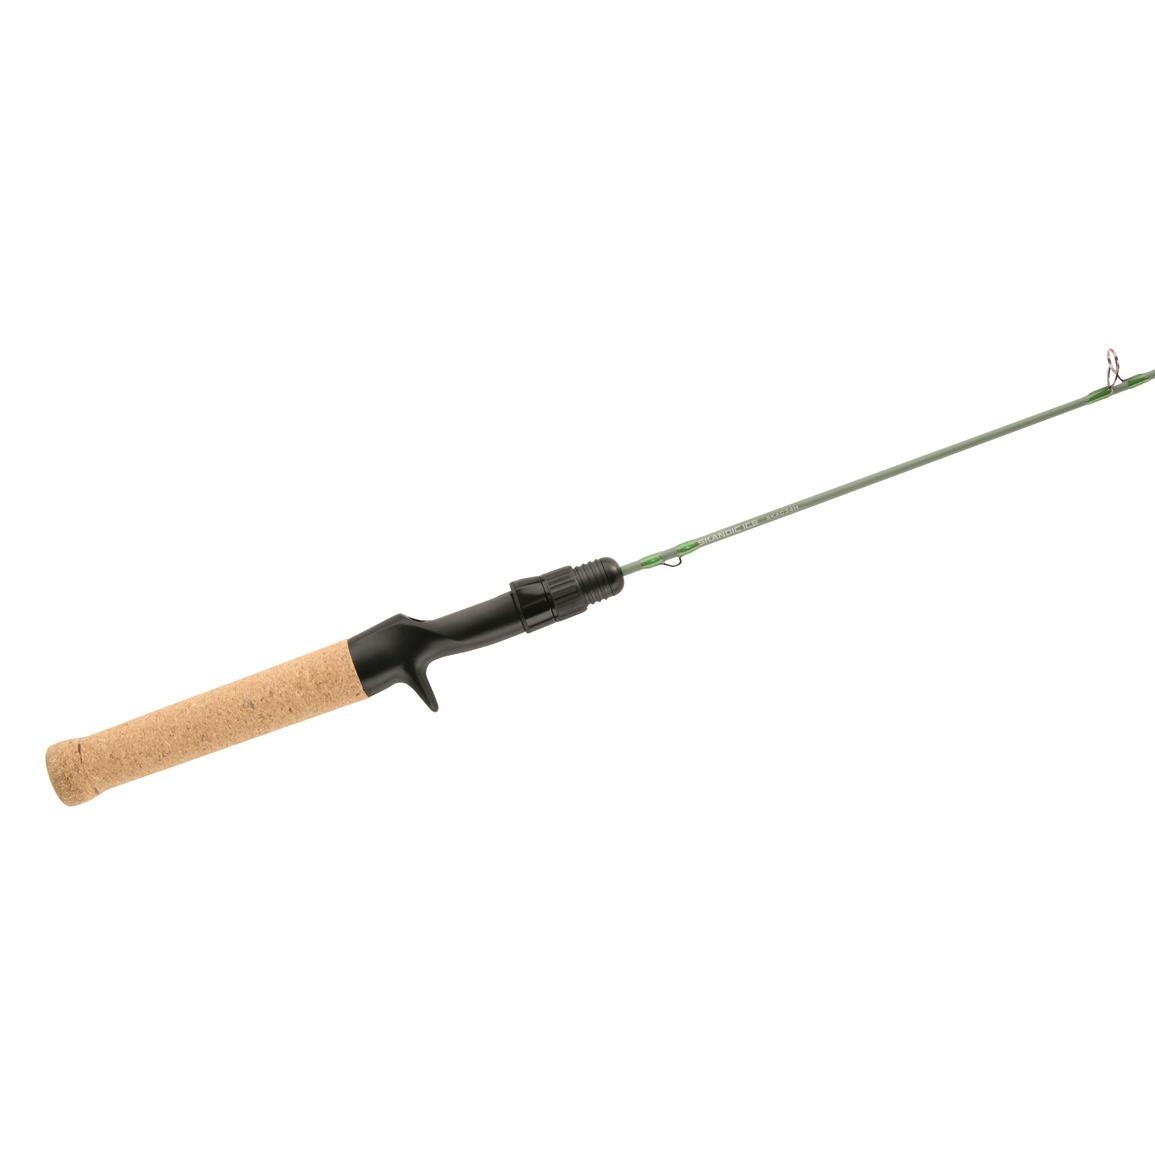 St. Croix Skandic Ice Casting 34 H - Discount Fishing Tackle